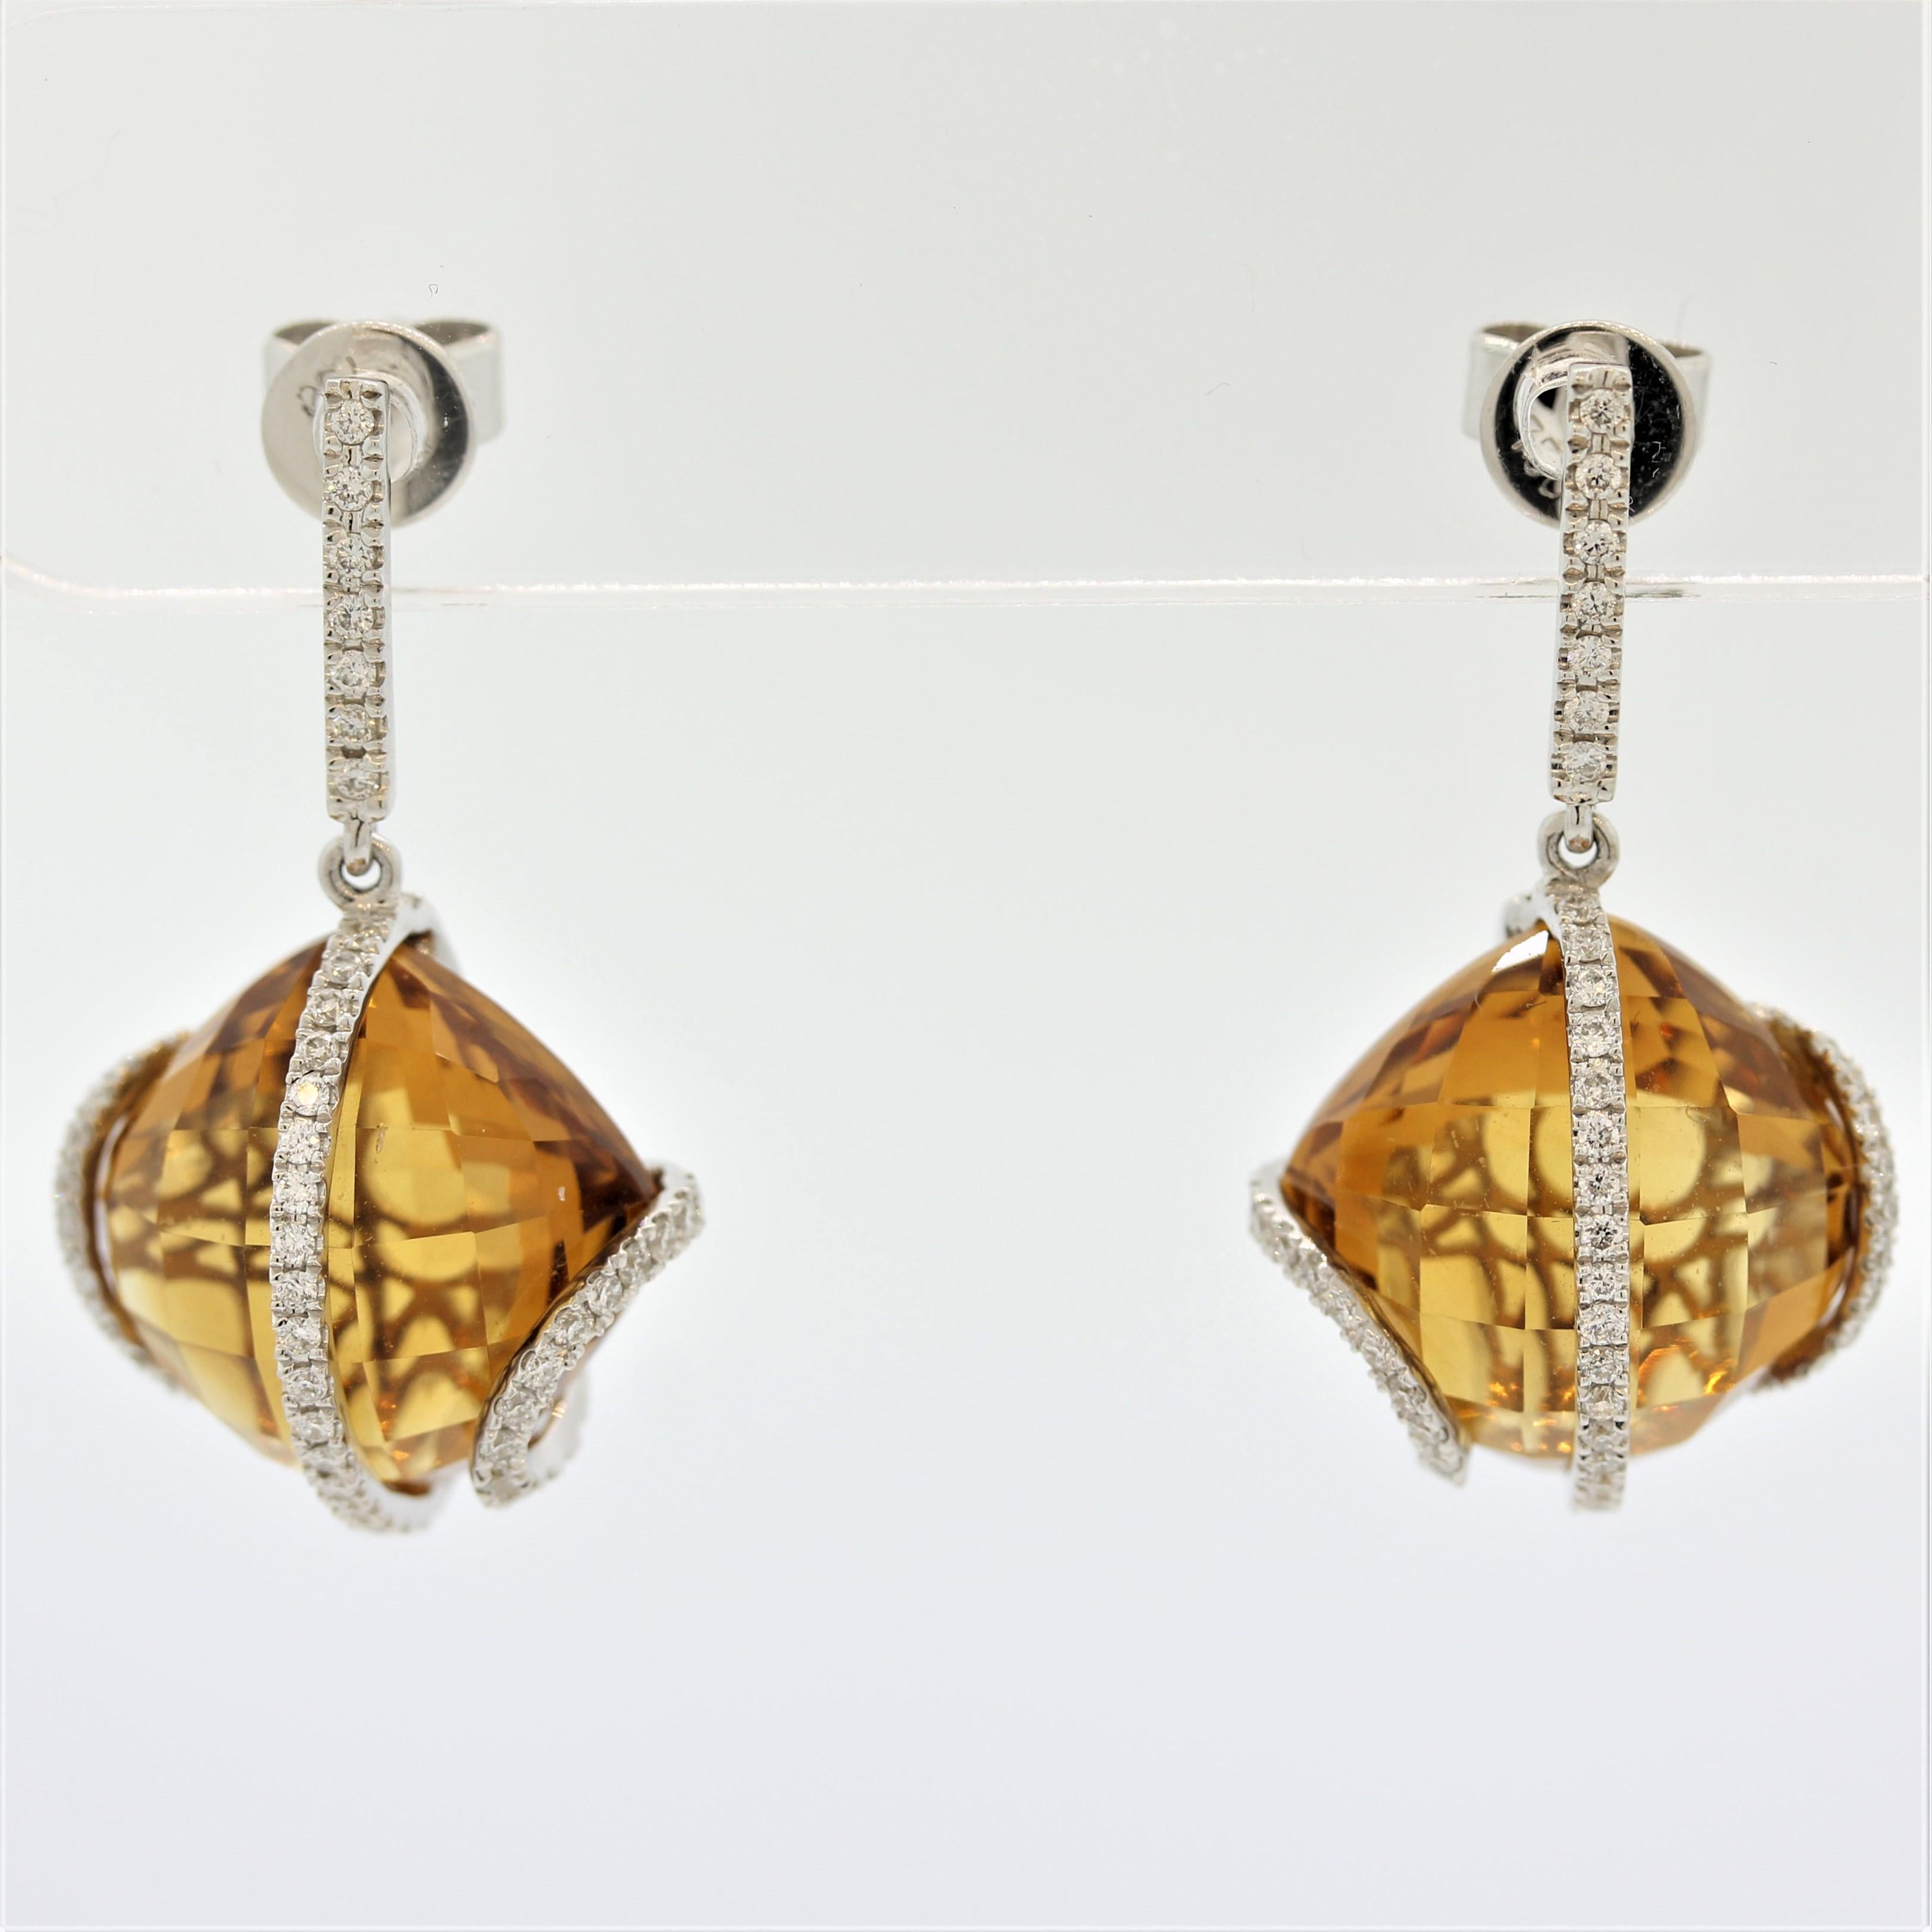 A unique and stylish pair of drop earrings. They feature 2 cushion shaped citrines weighing a total of 22.64 carats that have a bright and vibrant golden orange color. They are accented by 0.64 carats of round brilliant cut diamonds set in 18k white